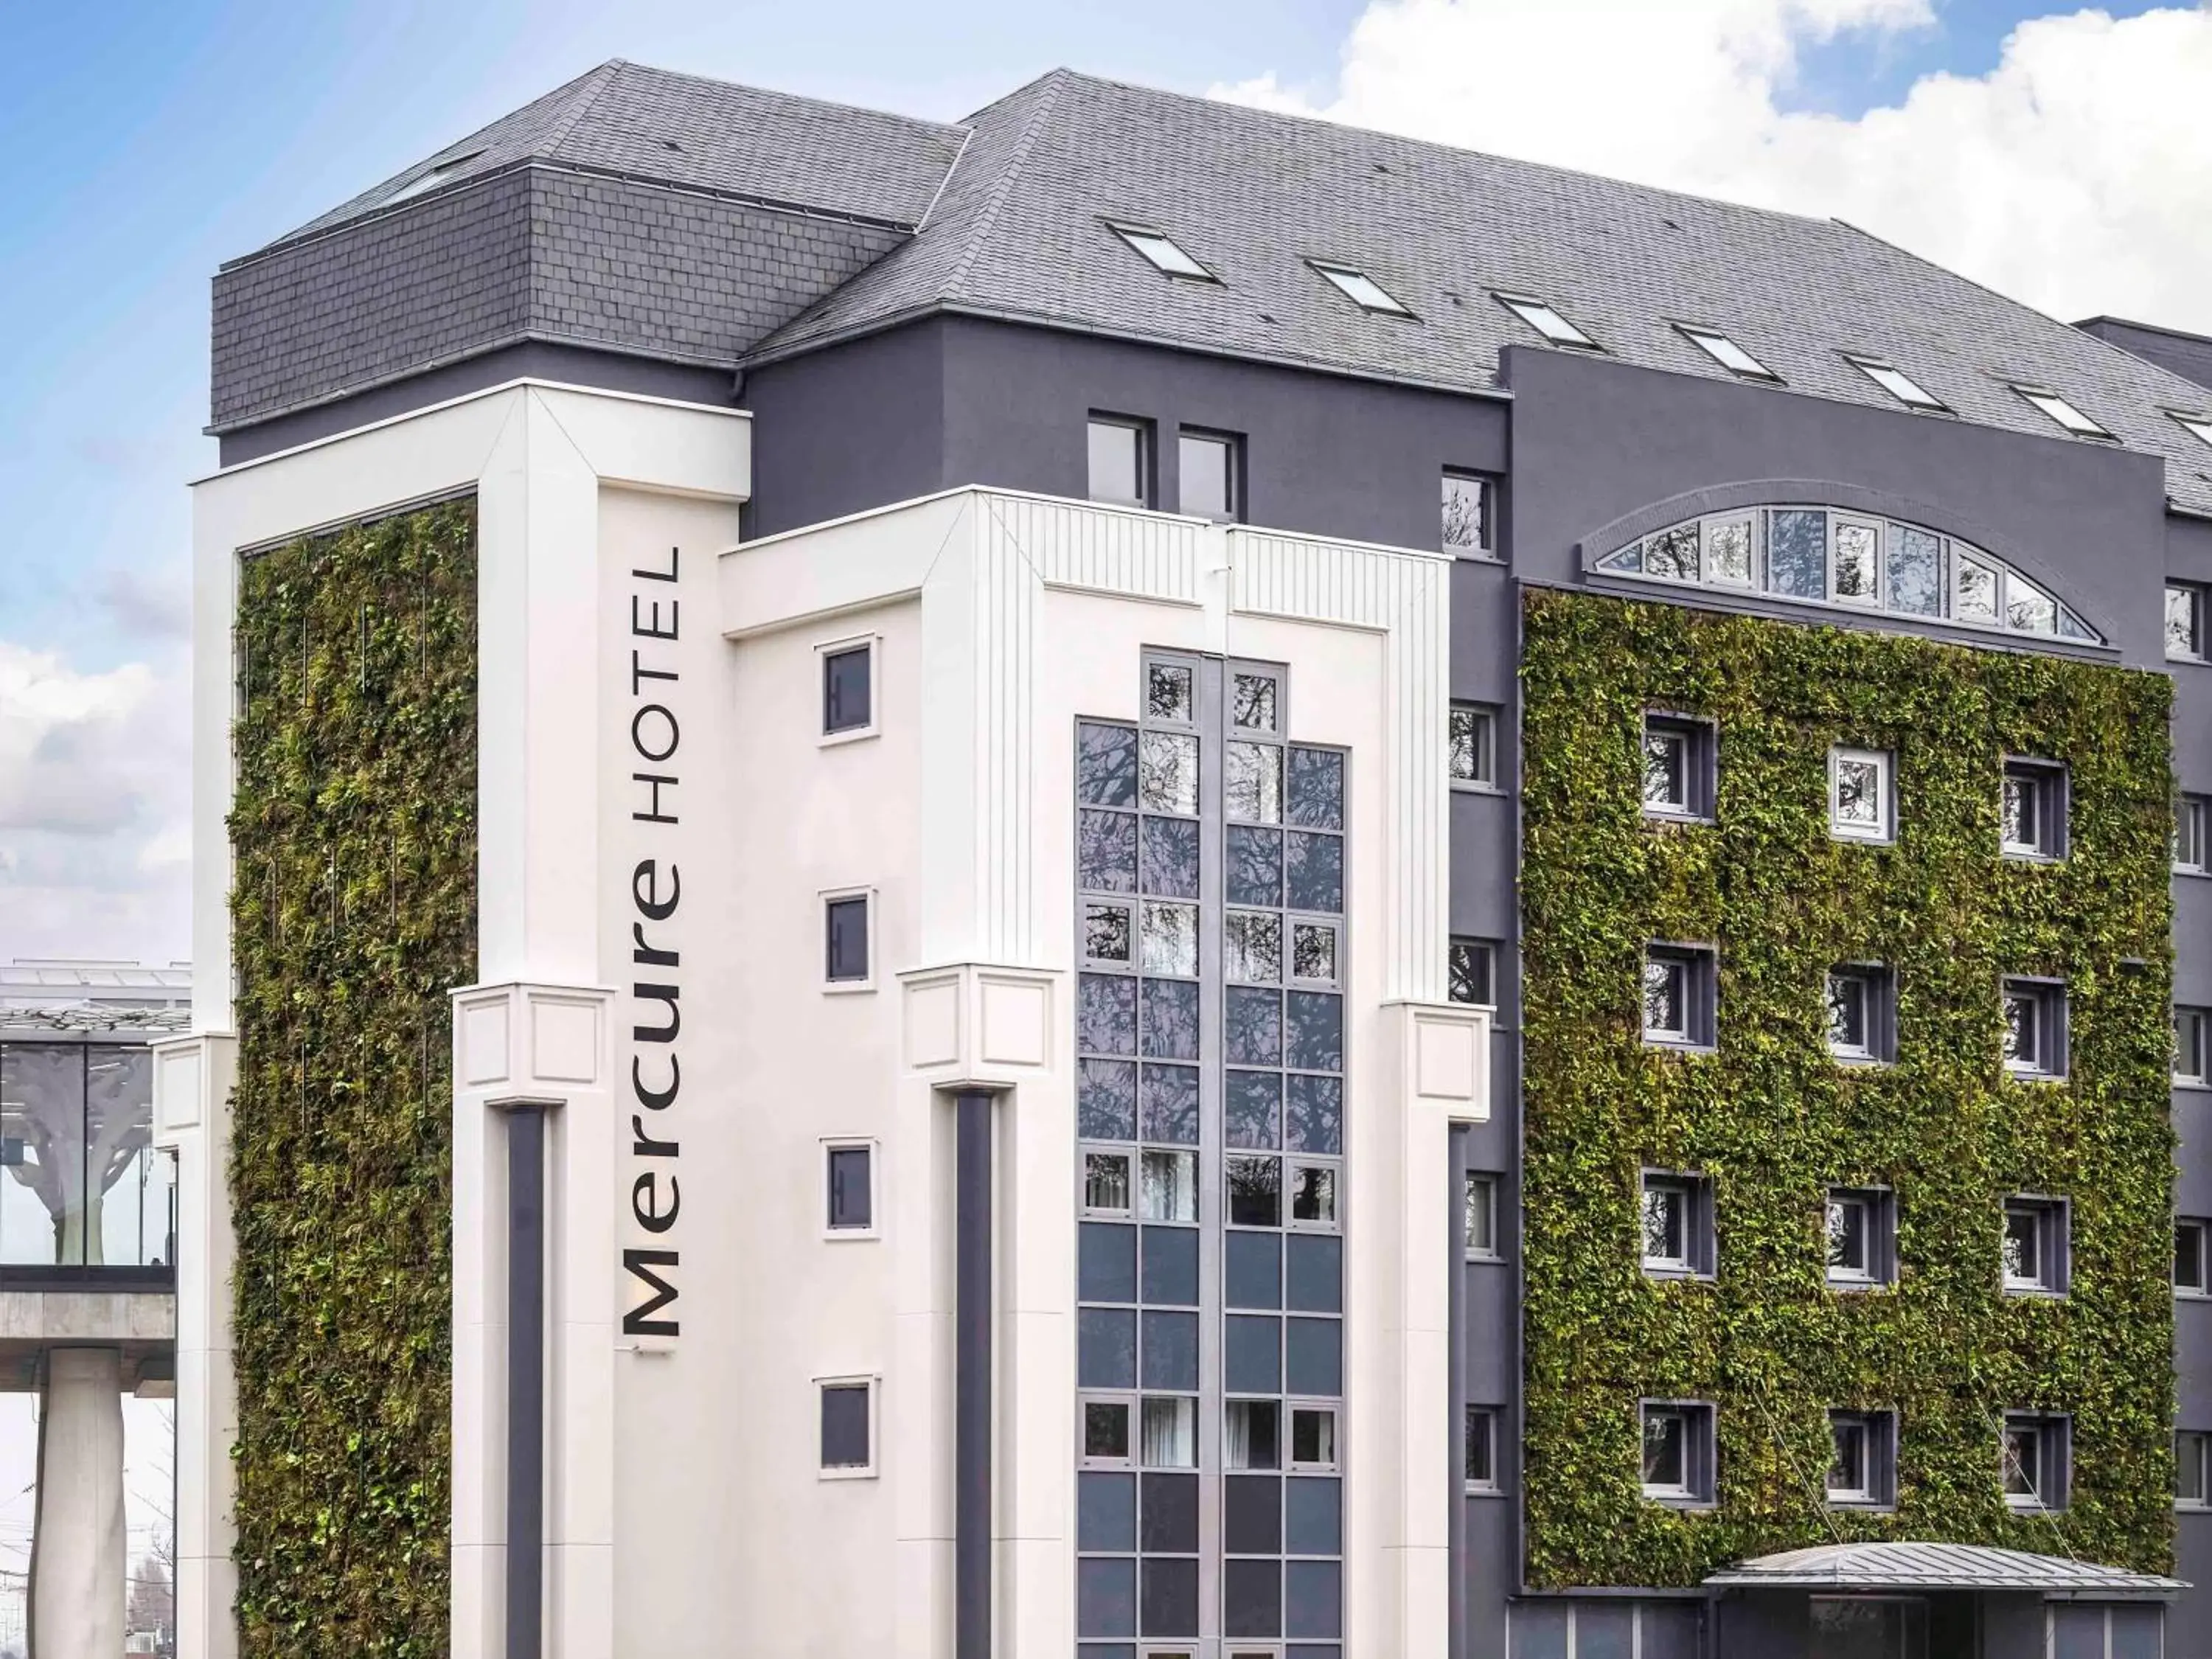 On site, Property Building in Mercure Nantes Centre Gare